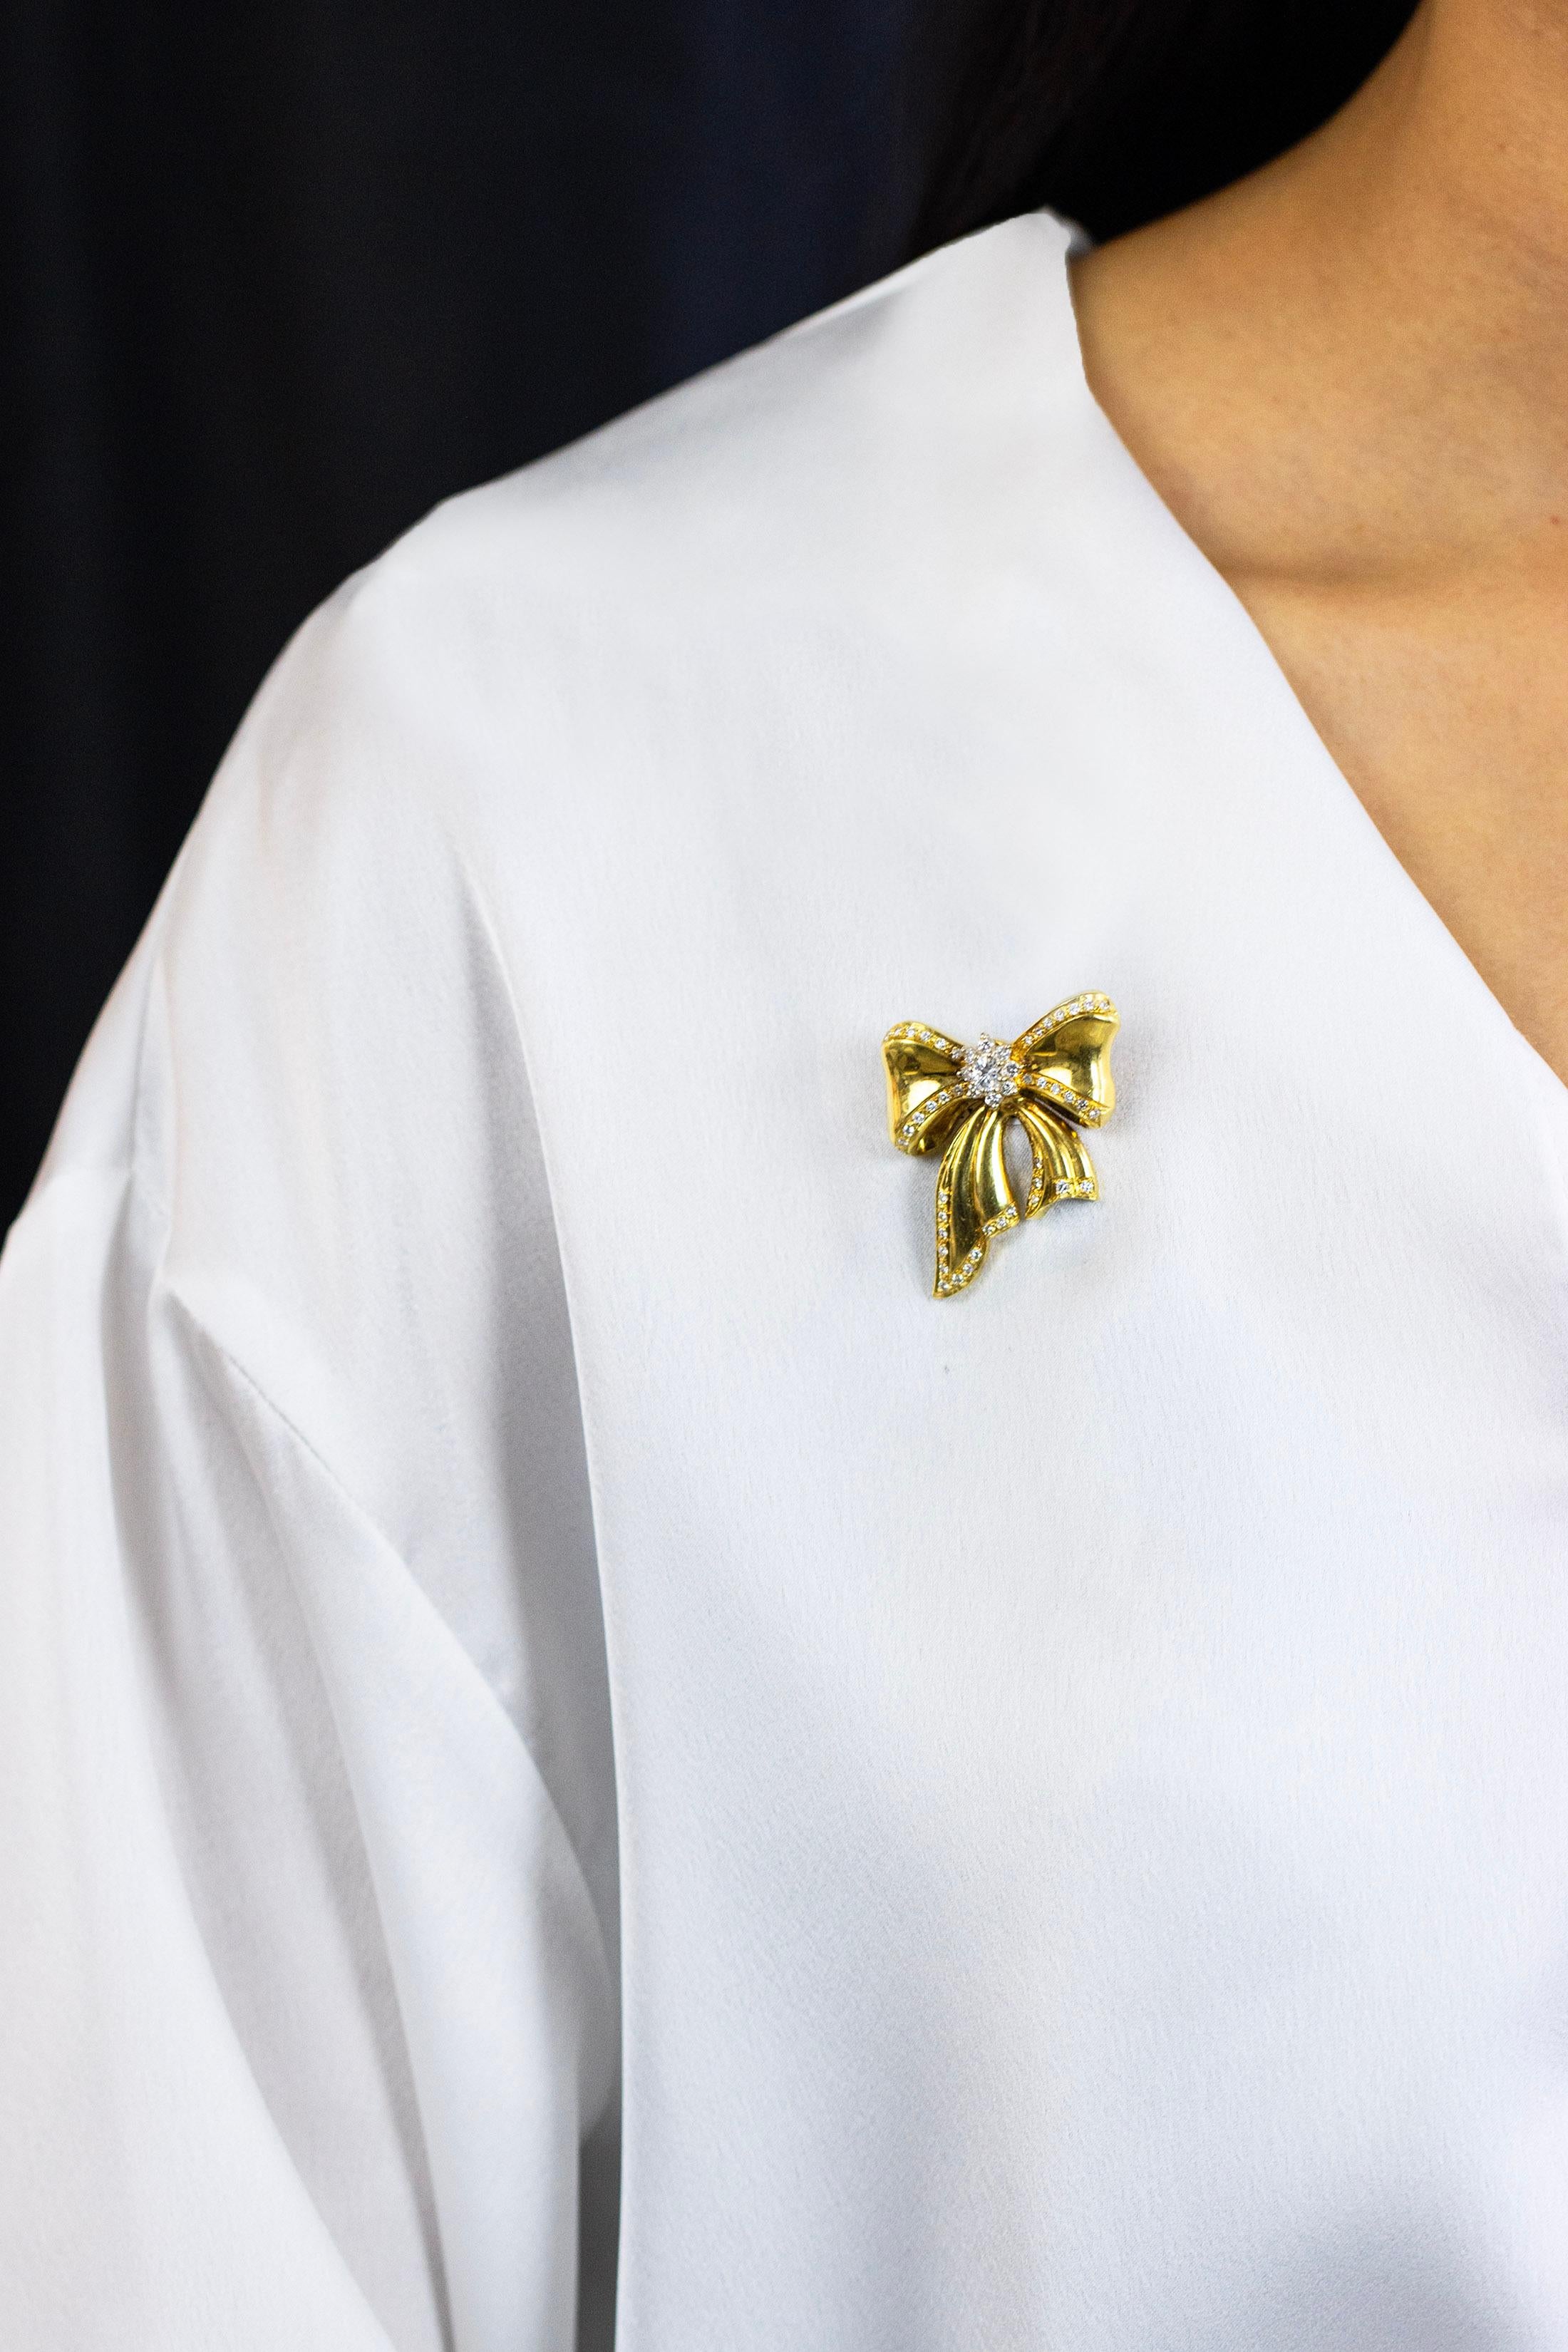 bow tie with brooch